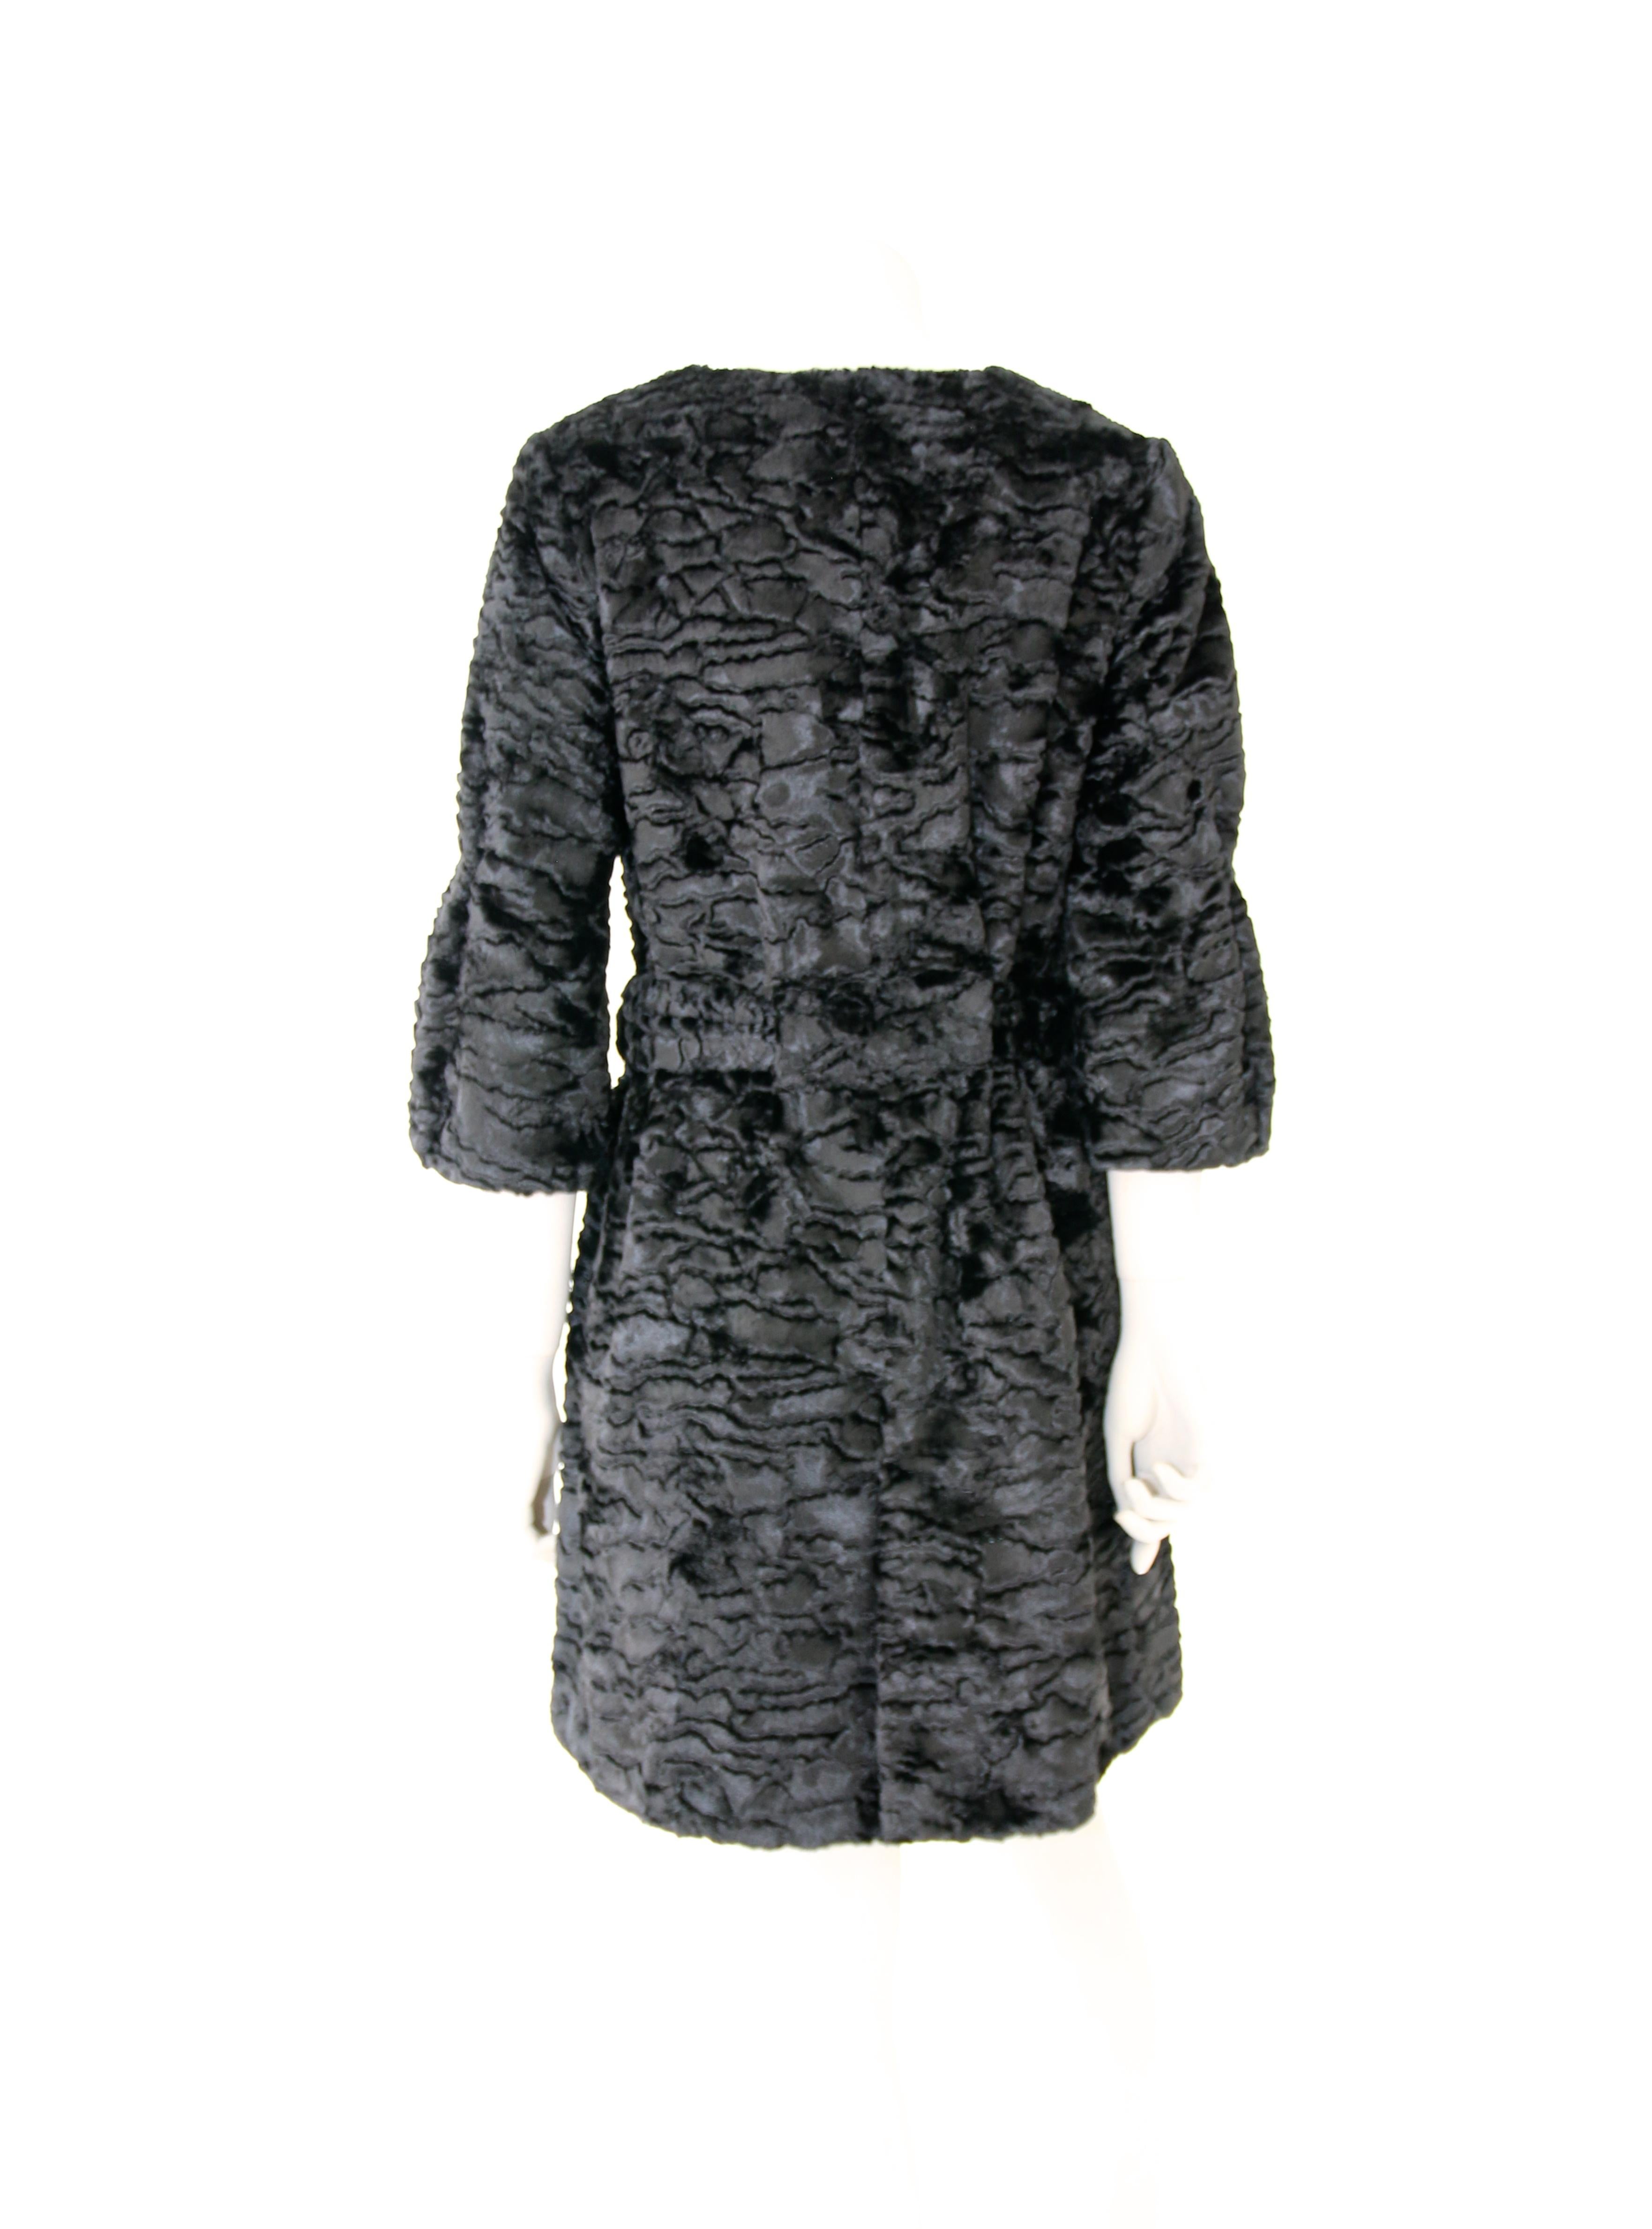 Pelush Black Astrakhan Faux Fur Coat With Belt - Small -  (1/M Available) For Sale 3